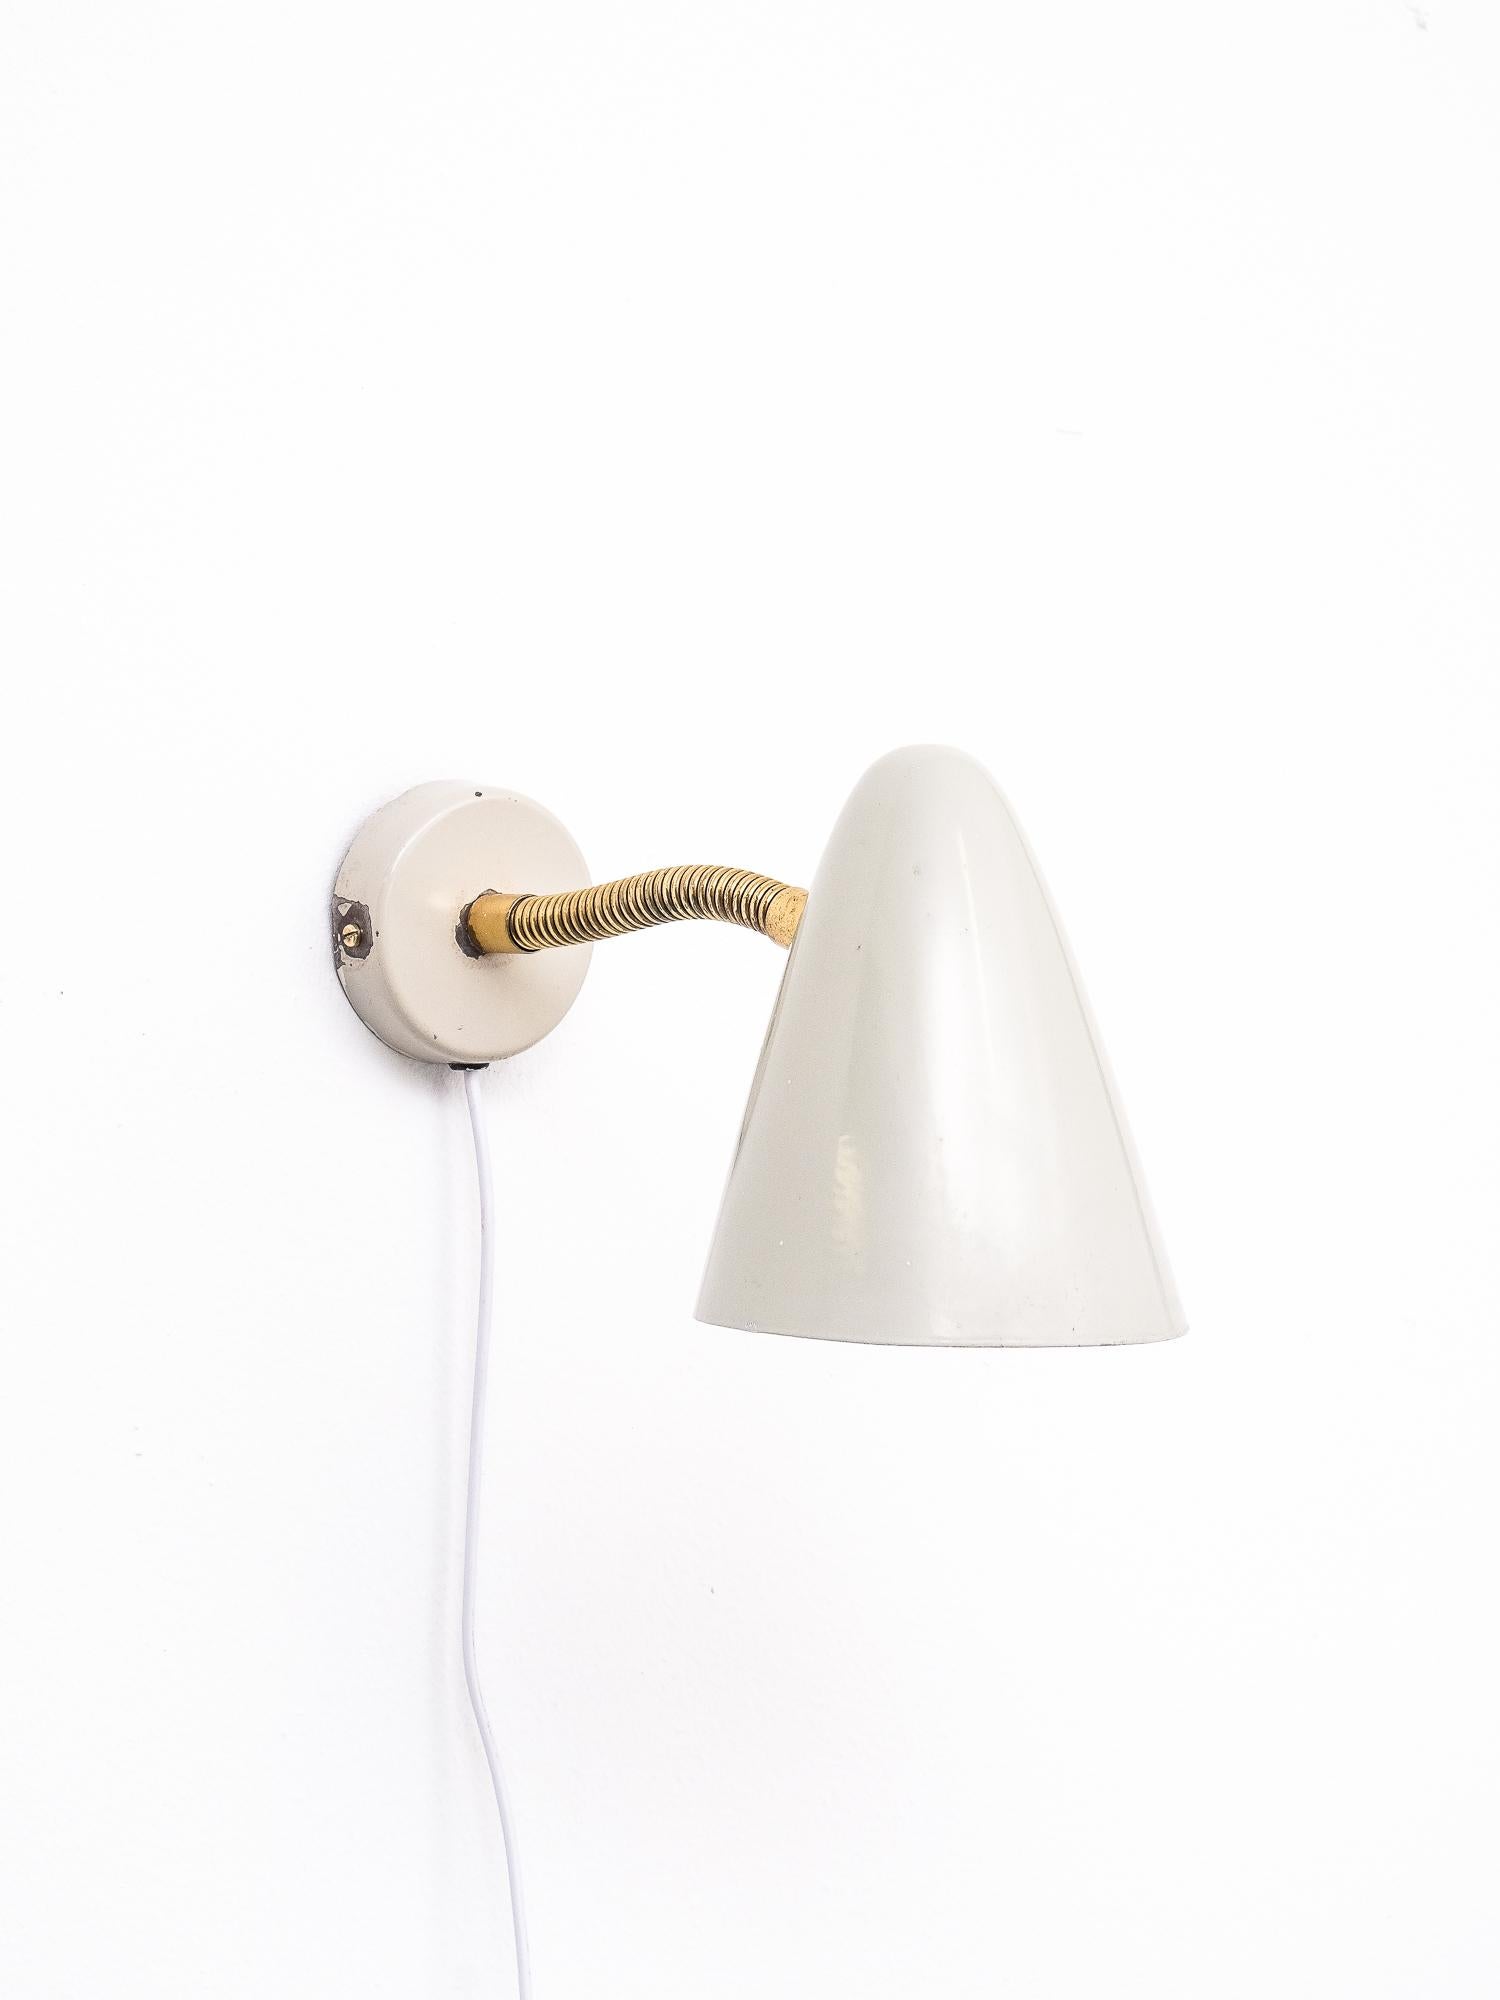 1950s Lisa Johansson-Pape model 50-084 wall light for Orno, Finland.

Adjustable wall light with brass gooseneck arm. Shade can be raised and lowered as well as rotated right and left.

Measures: Shade diameter 13 cm
E27 bulb holder.